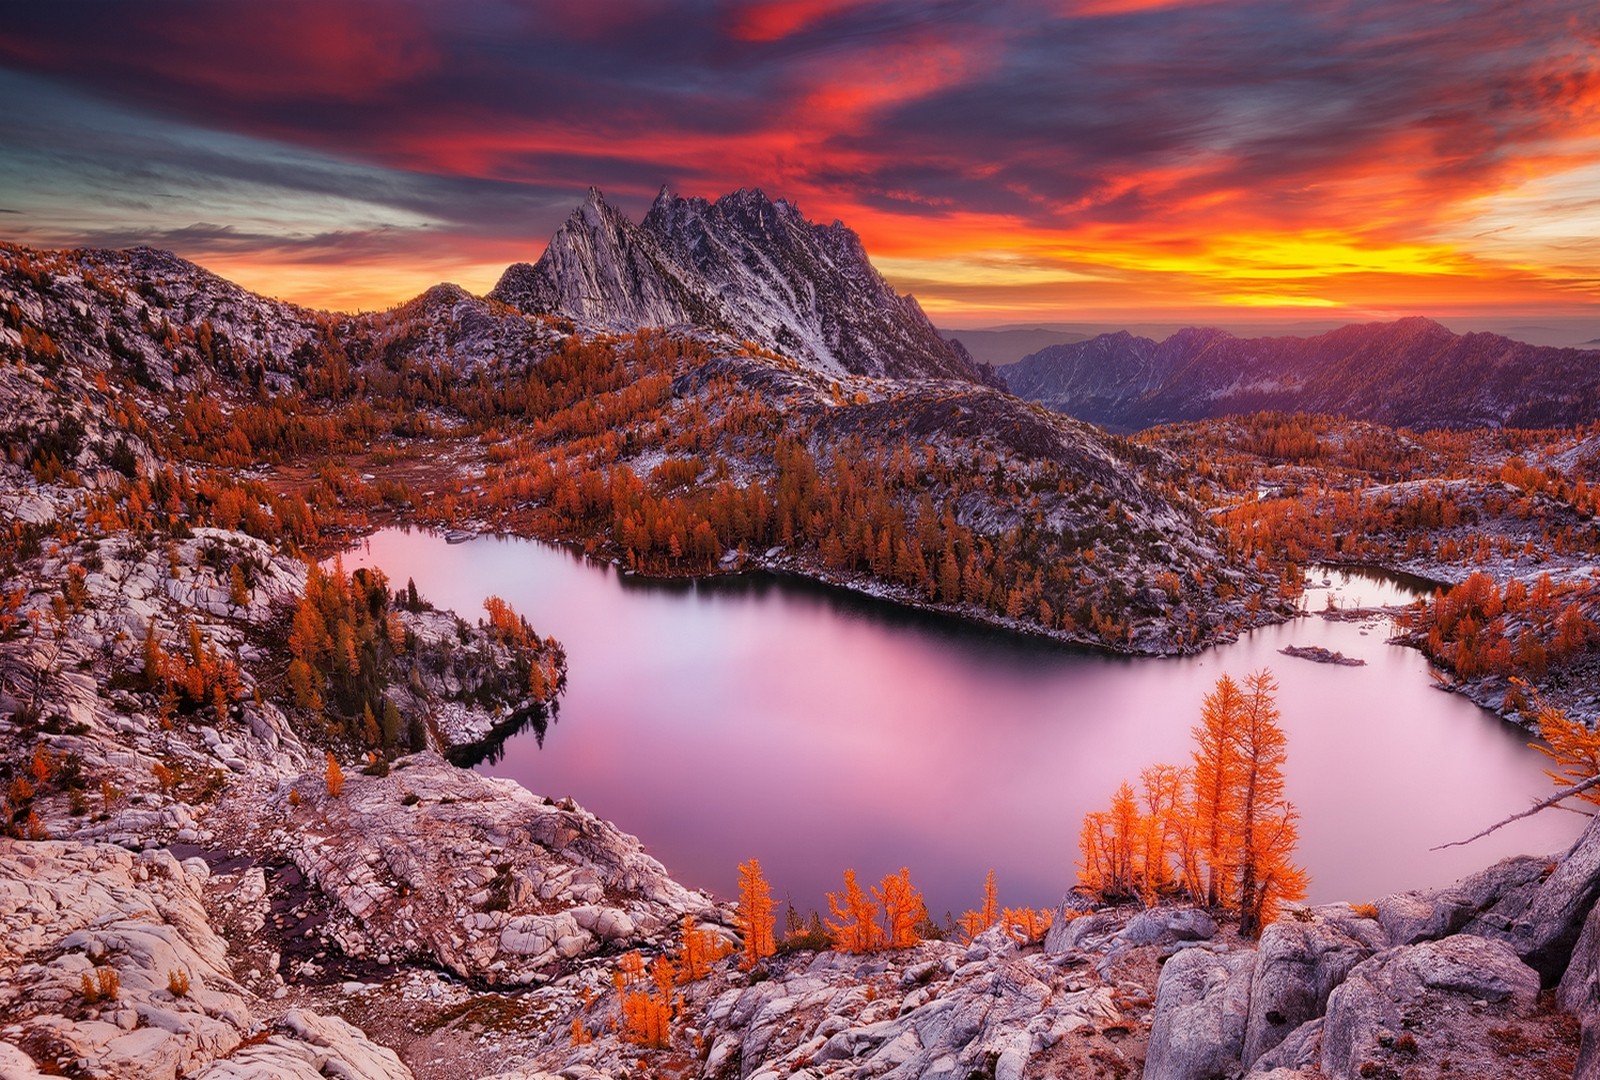 General 1600x1080 nature landscape lake mountains sunset fall forest water sky clouds orange sky sunlight